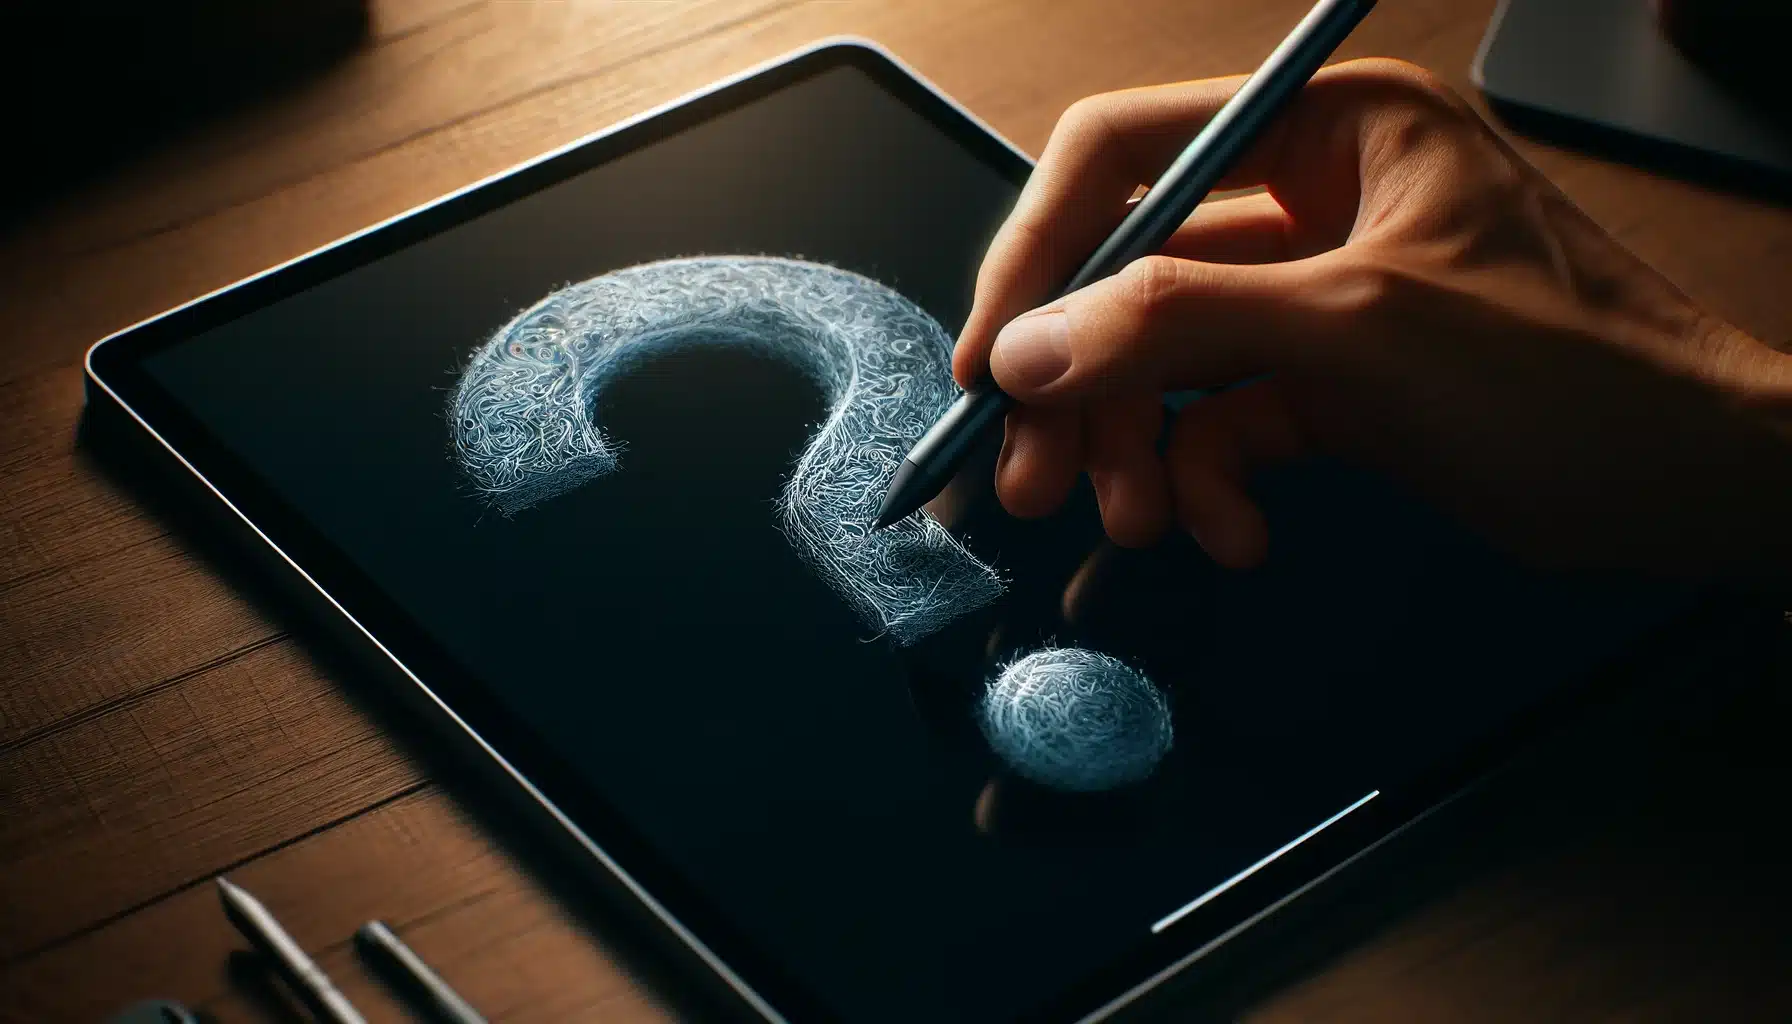 Ultra-realistic depiction of a person's hand drawing a question mark on a Mac tablet screen with a stylus, highlighting intricate details like texture and reflections.